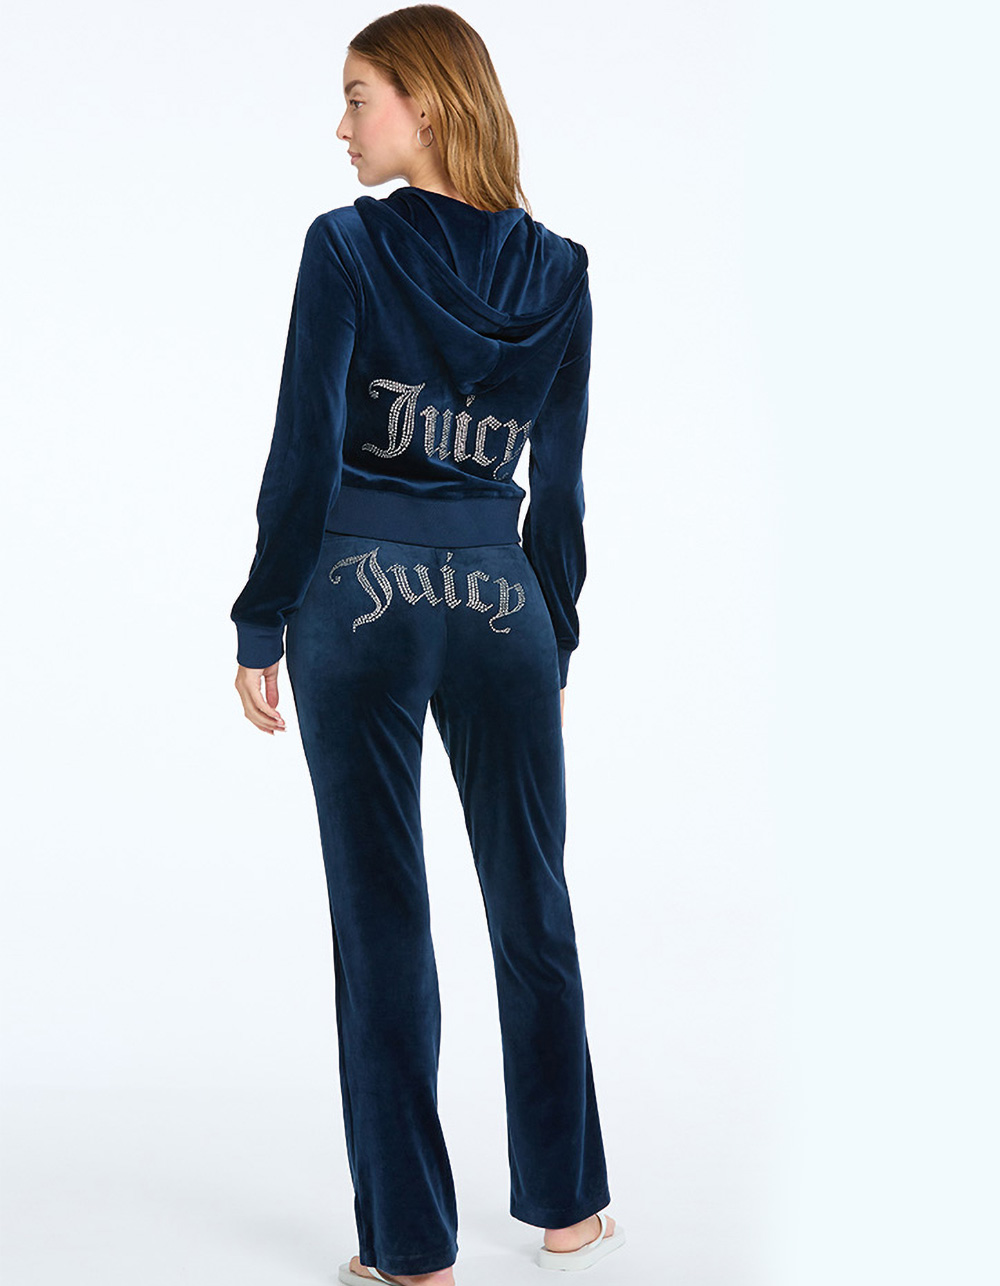 Juicy Couture Set Blue Size M - $45 (53% Off Retail) - From Abby